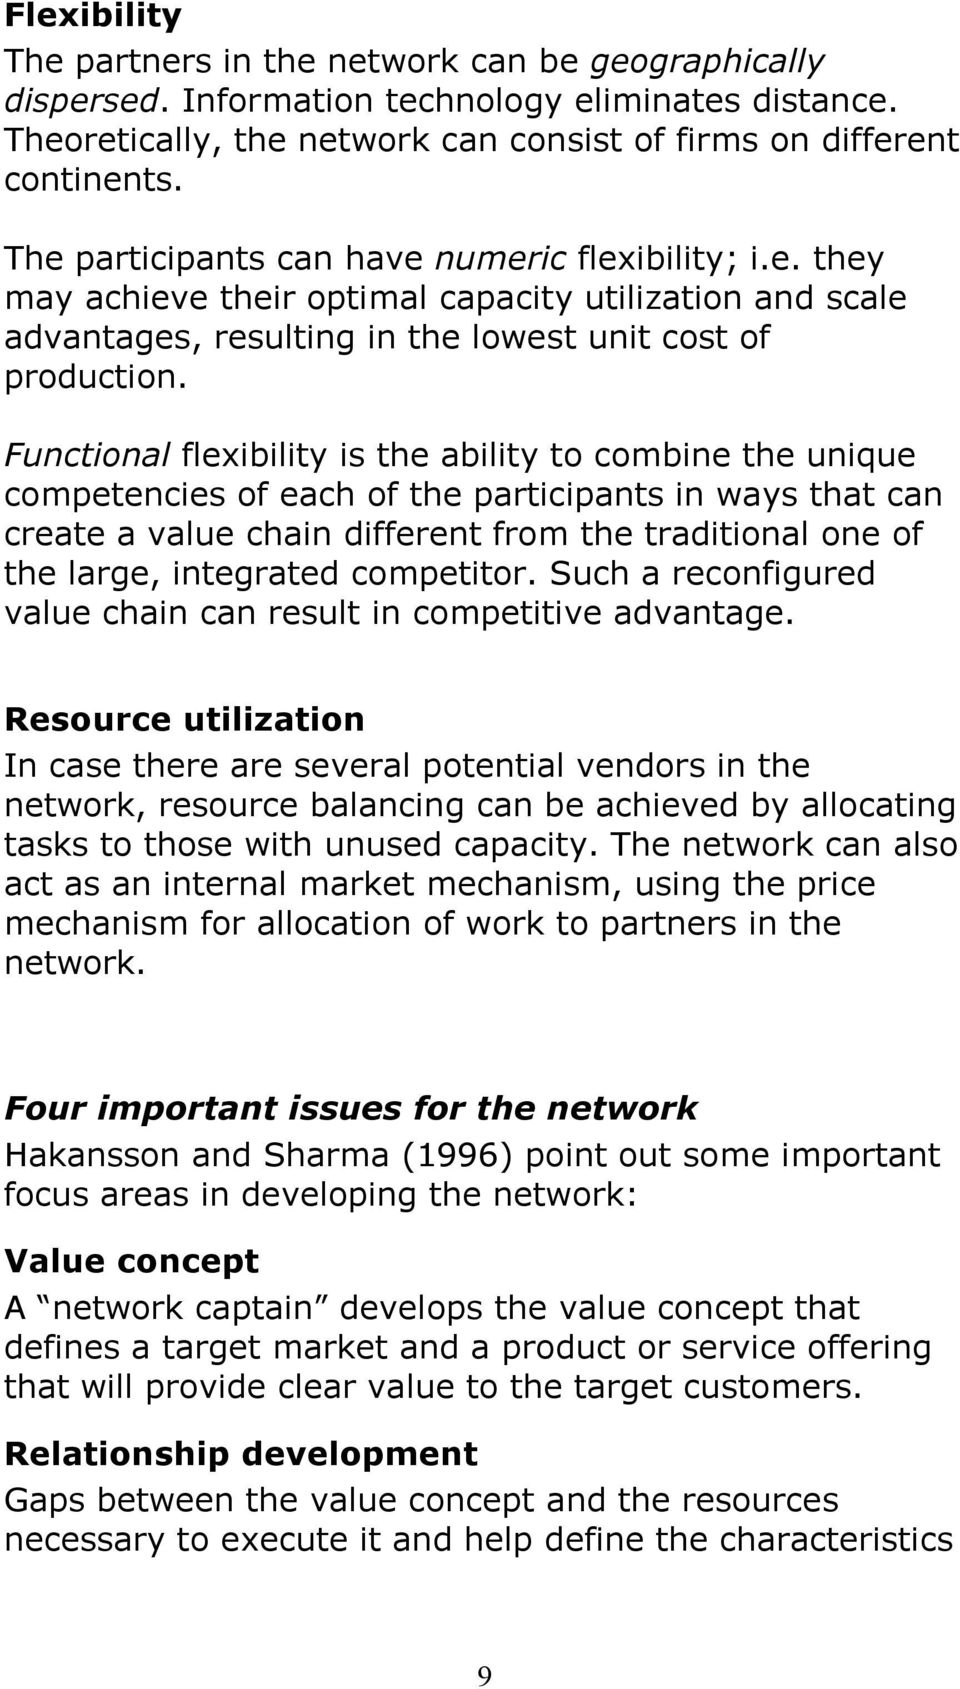 Functional flexibility is the ability to combine the unique competencies of each of the participants in ways that can create a value chain different from the traditional one of the large, integrated